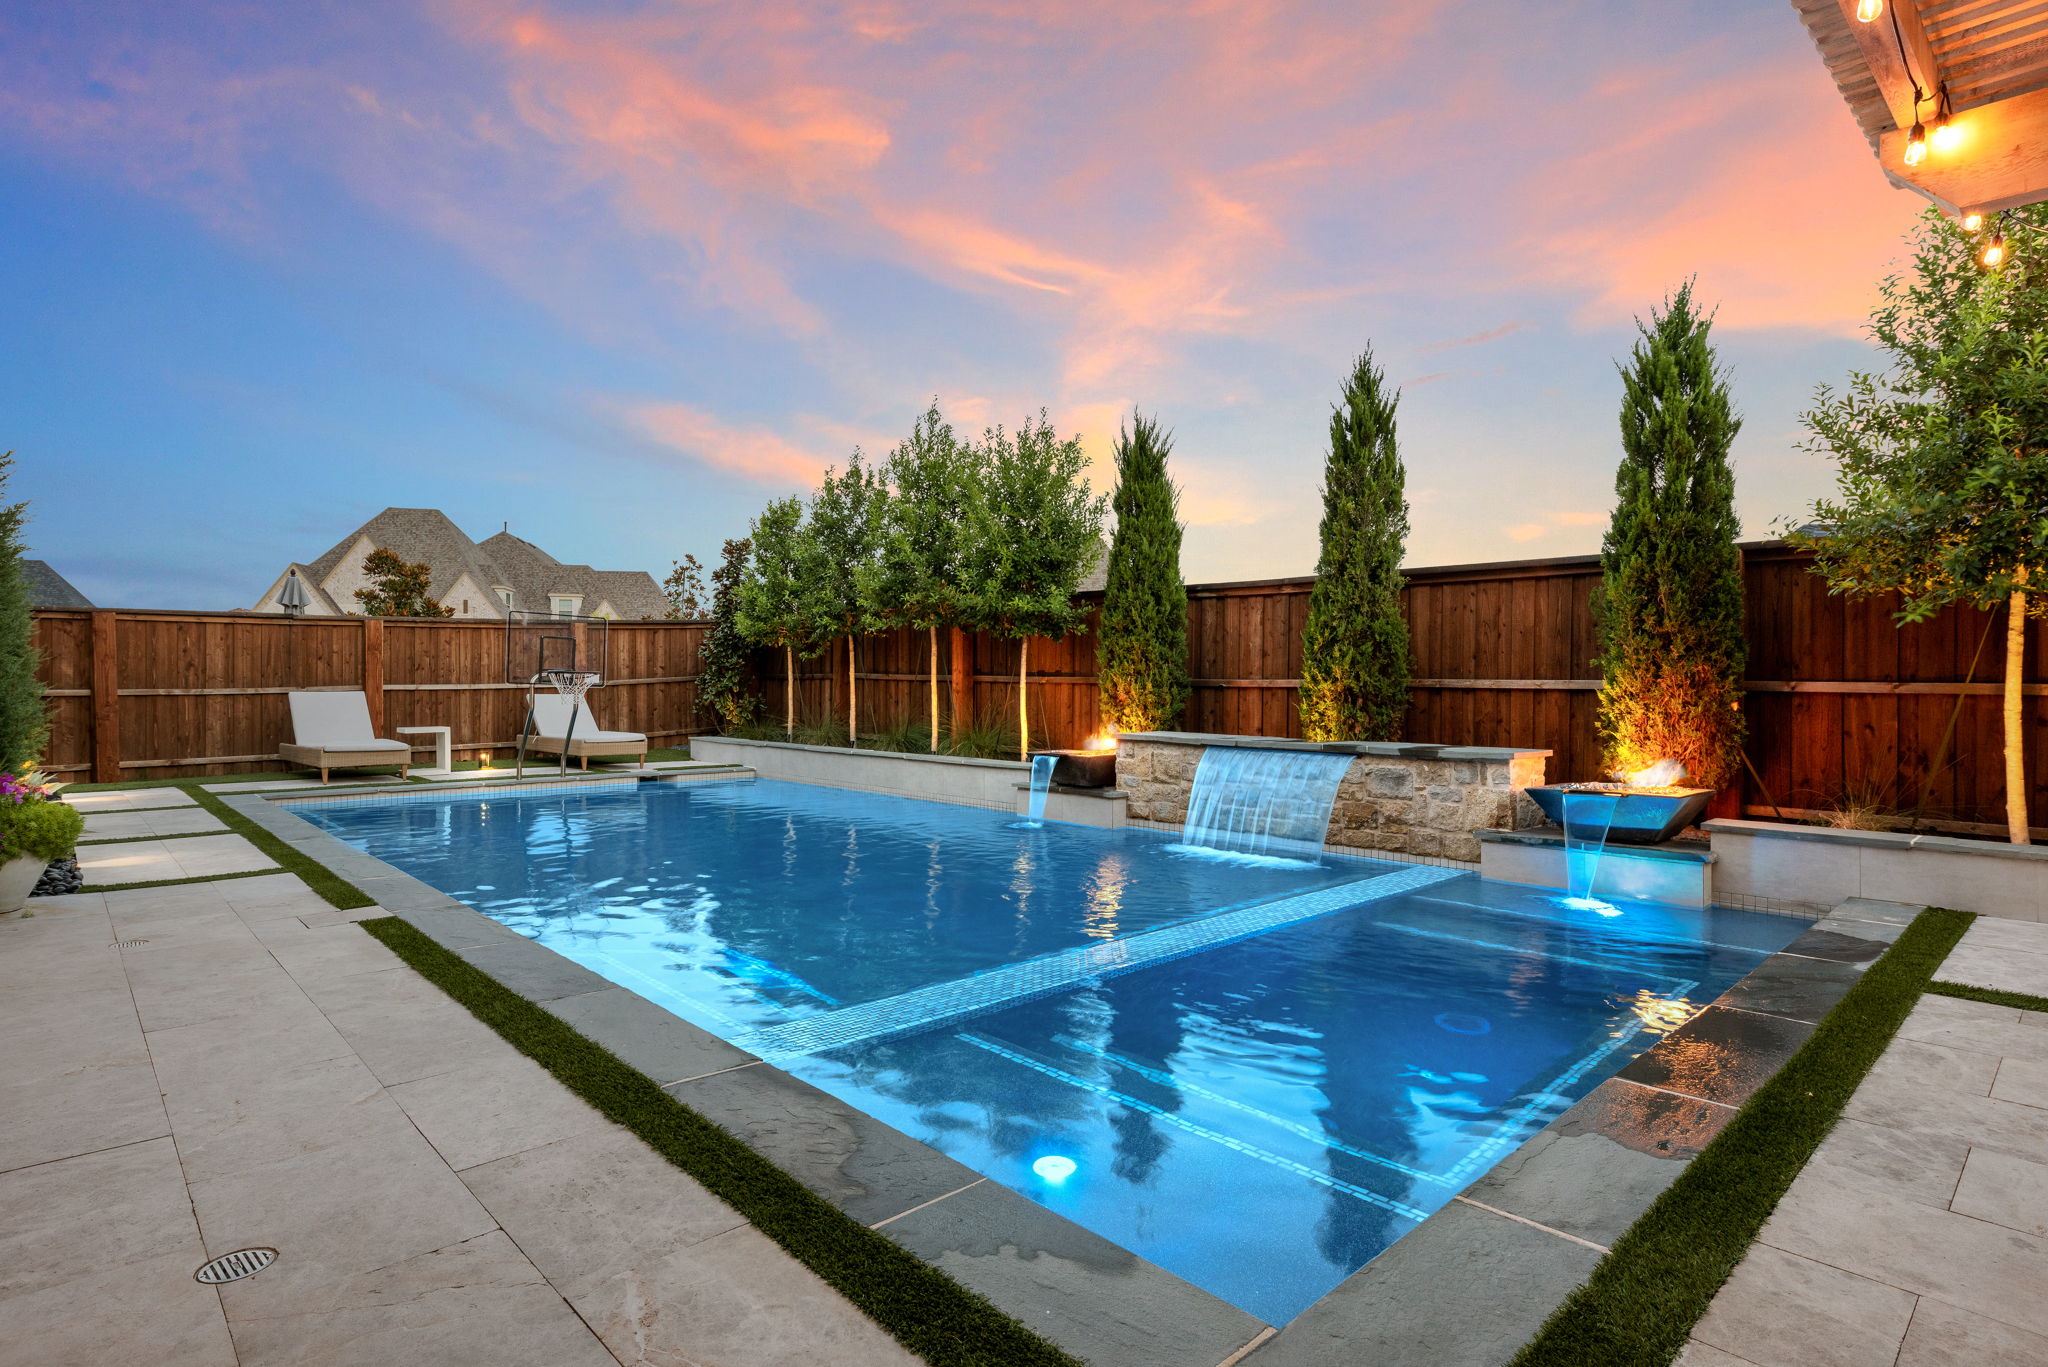 Swimming pool at sunset with fire features